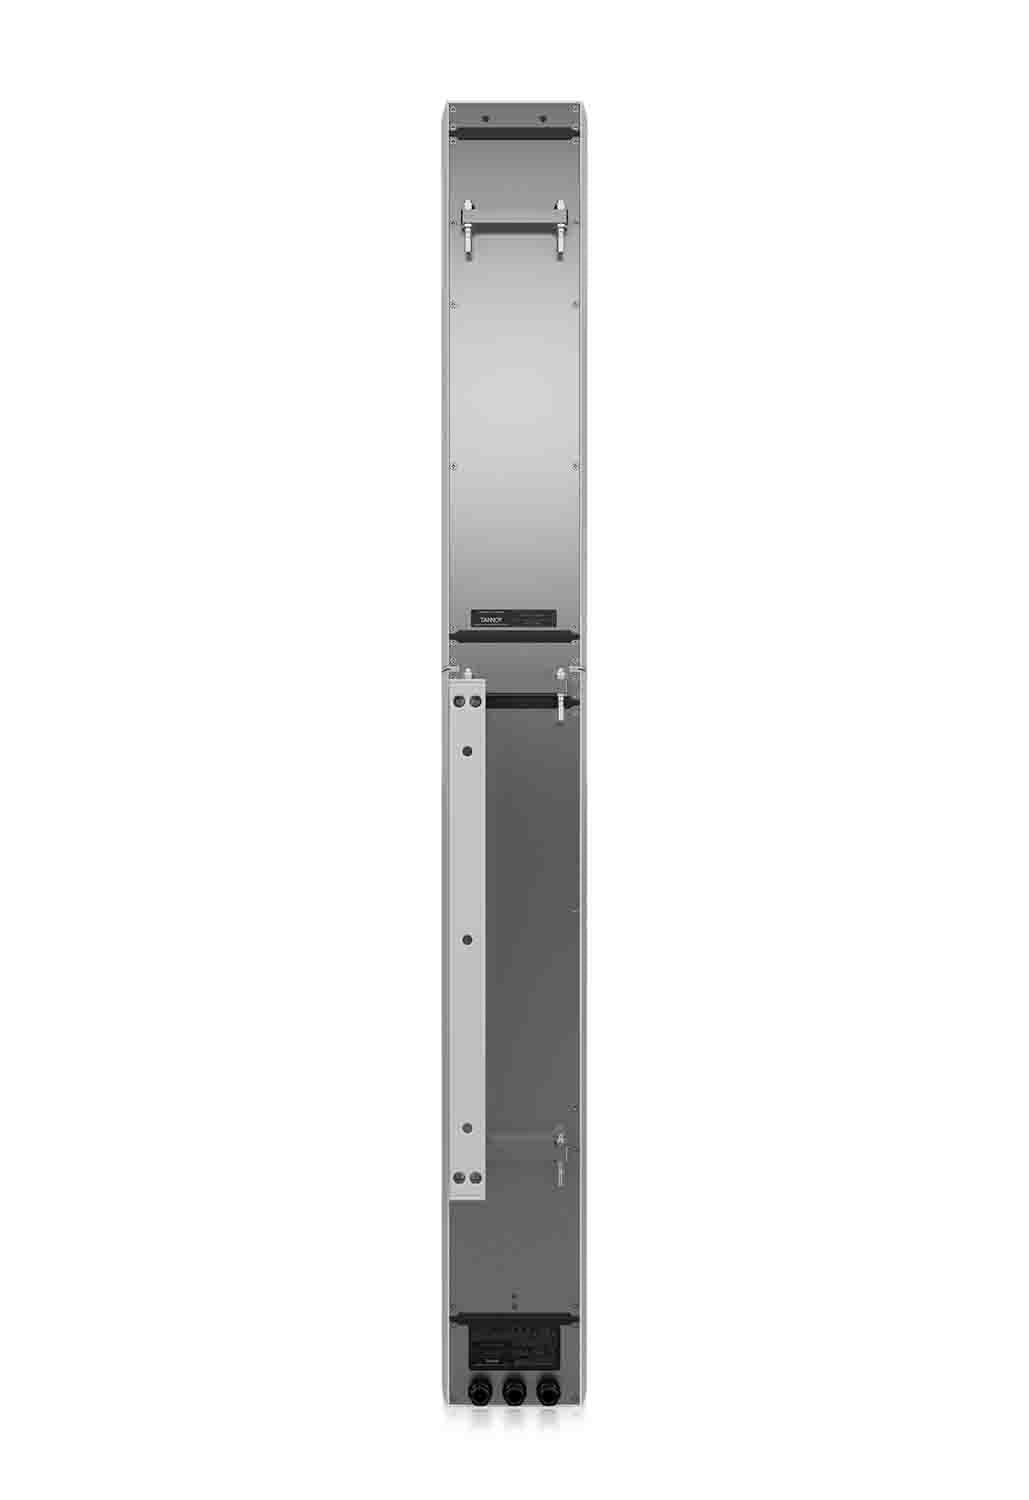 Tannoy QFLEX 24-WP Digitally Steerable Powered Column Array Loudspeaker with 24 Independently Controlled Drivers - Hollywood DJ